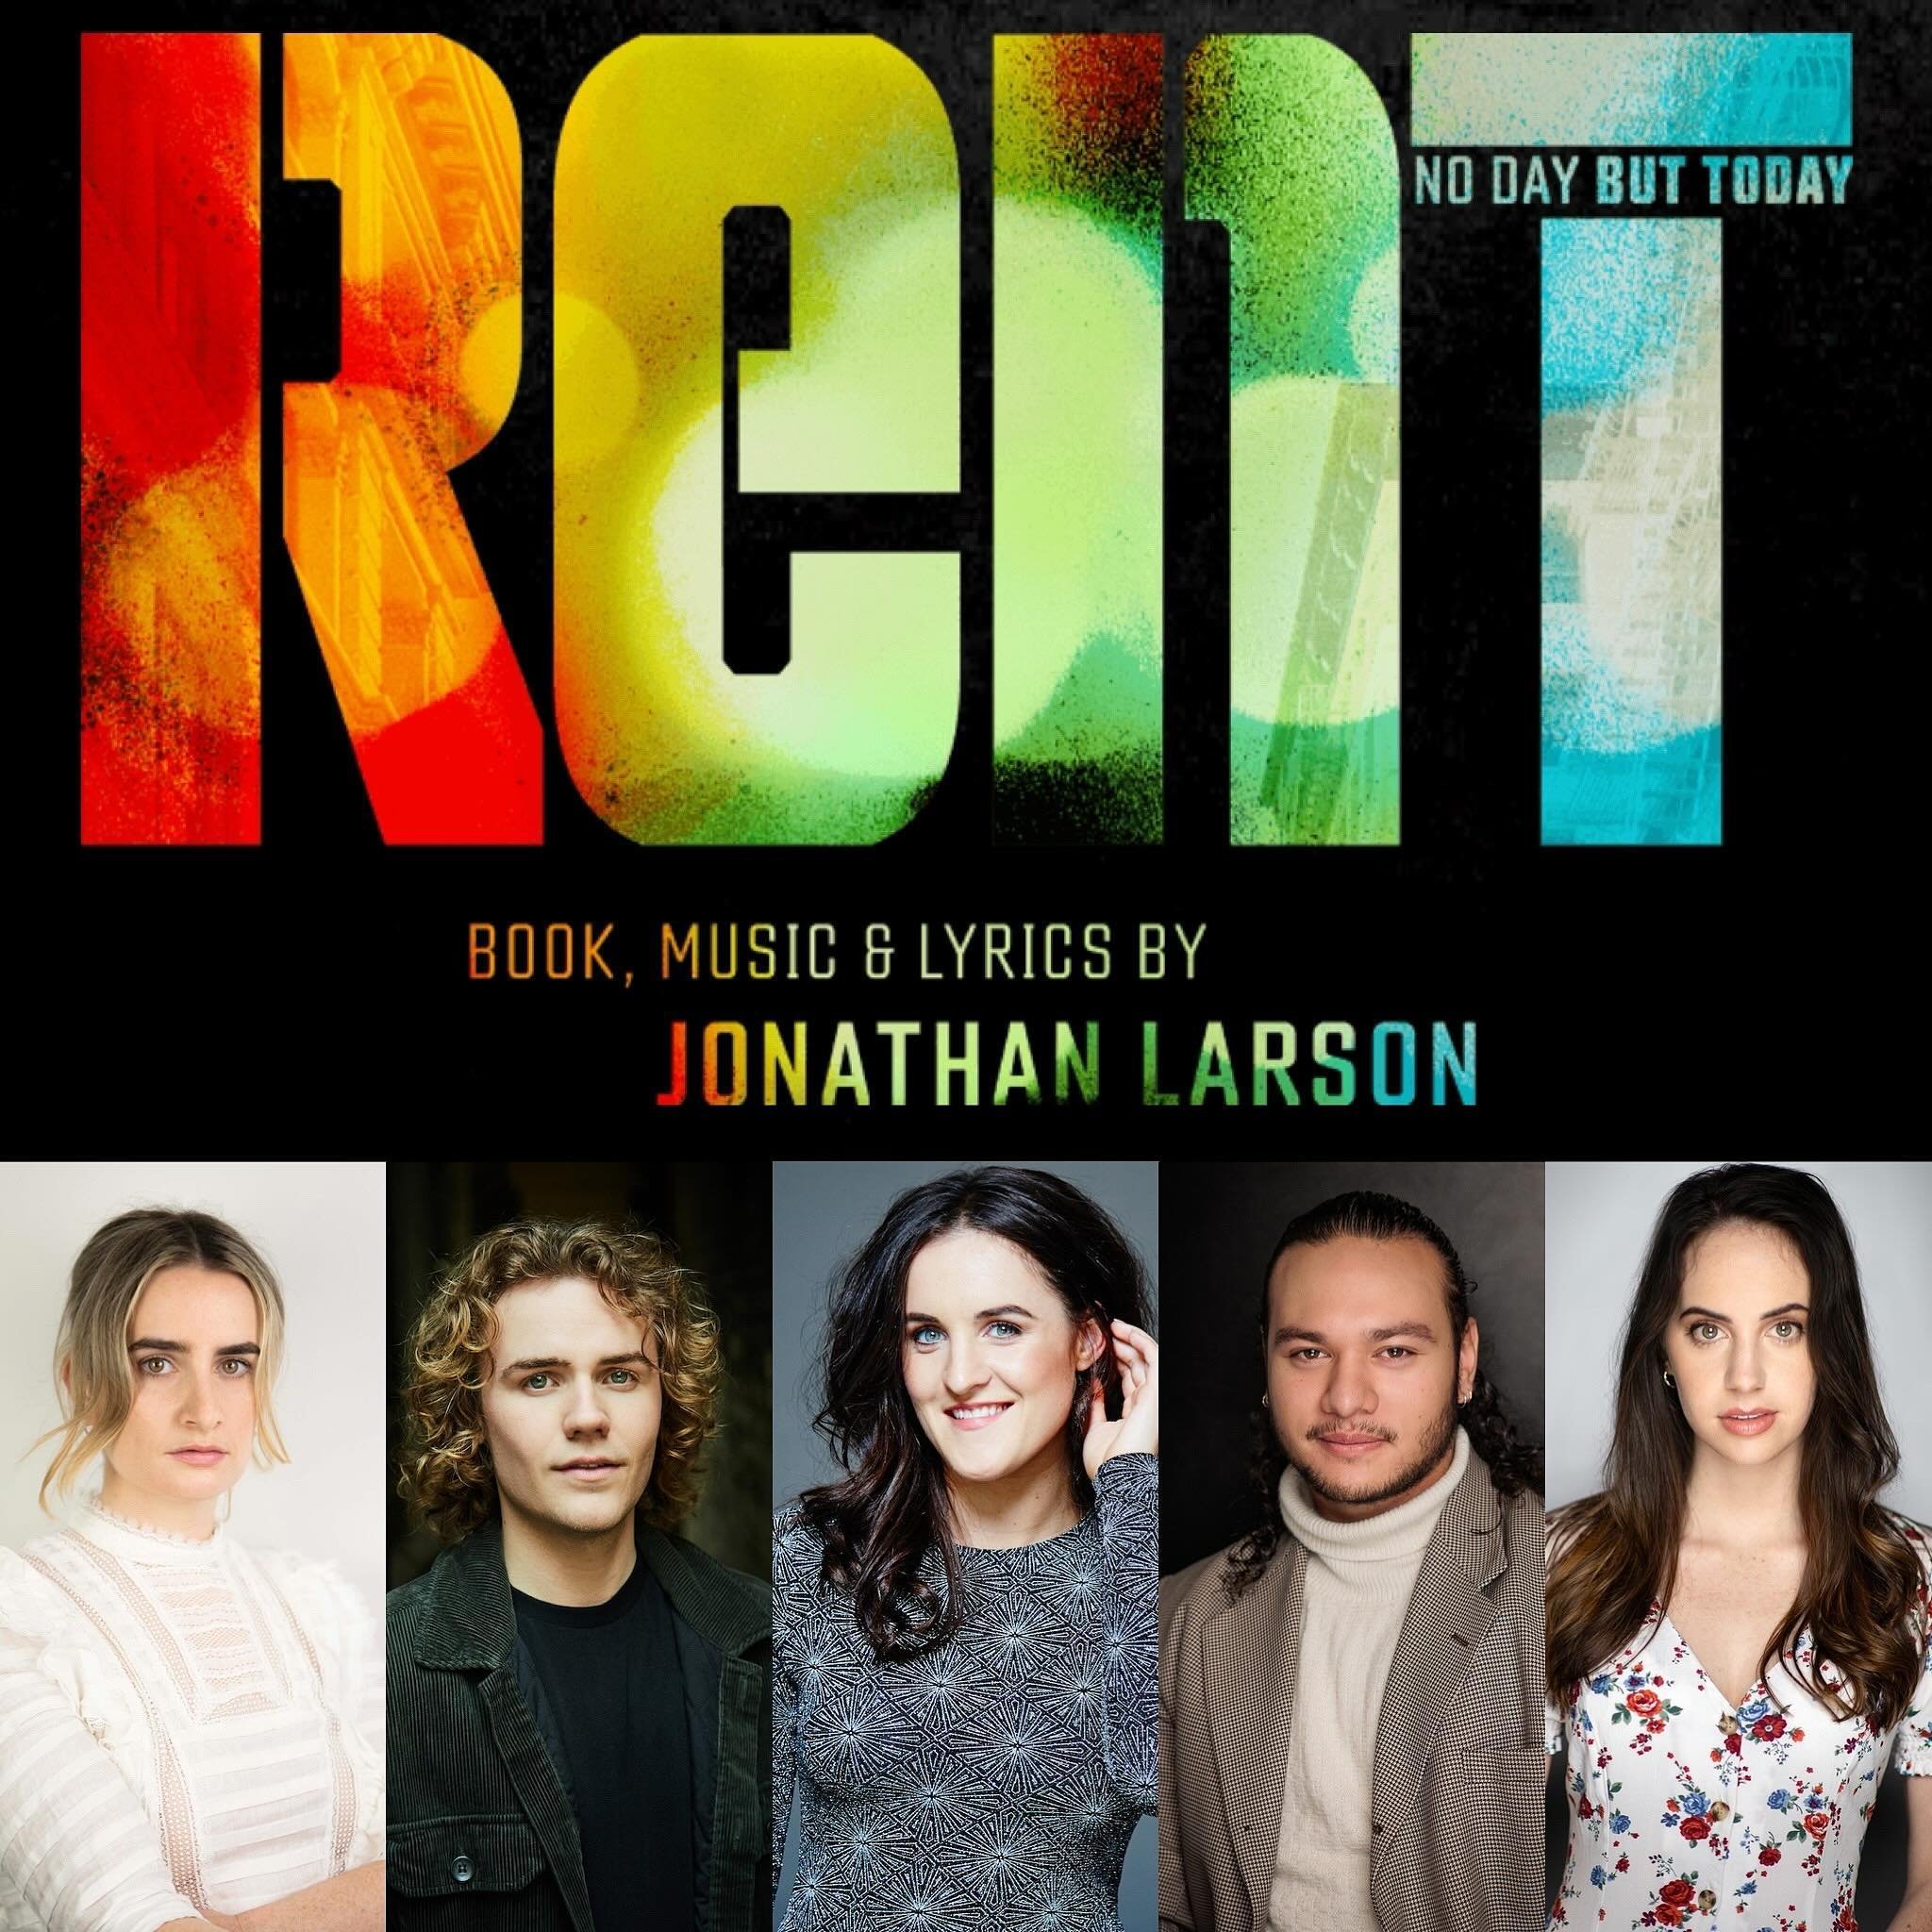 No Day But Today to wish these amazing T&amp;E artists a huge CHOOKAS for their opening night of @rentmusicalau in Perth!  Give it up for @hannahmcinerney @samharmon_ @billie_palin @tanalagaaia and @kelsiboyden 🙌🏽🫶🏽👏🏽
So proud of you all!!! 🖤
